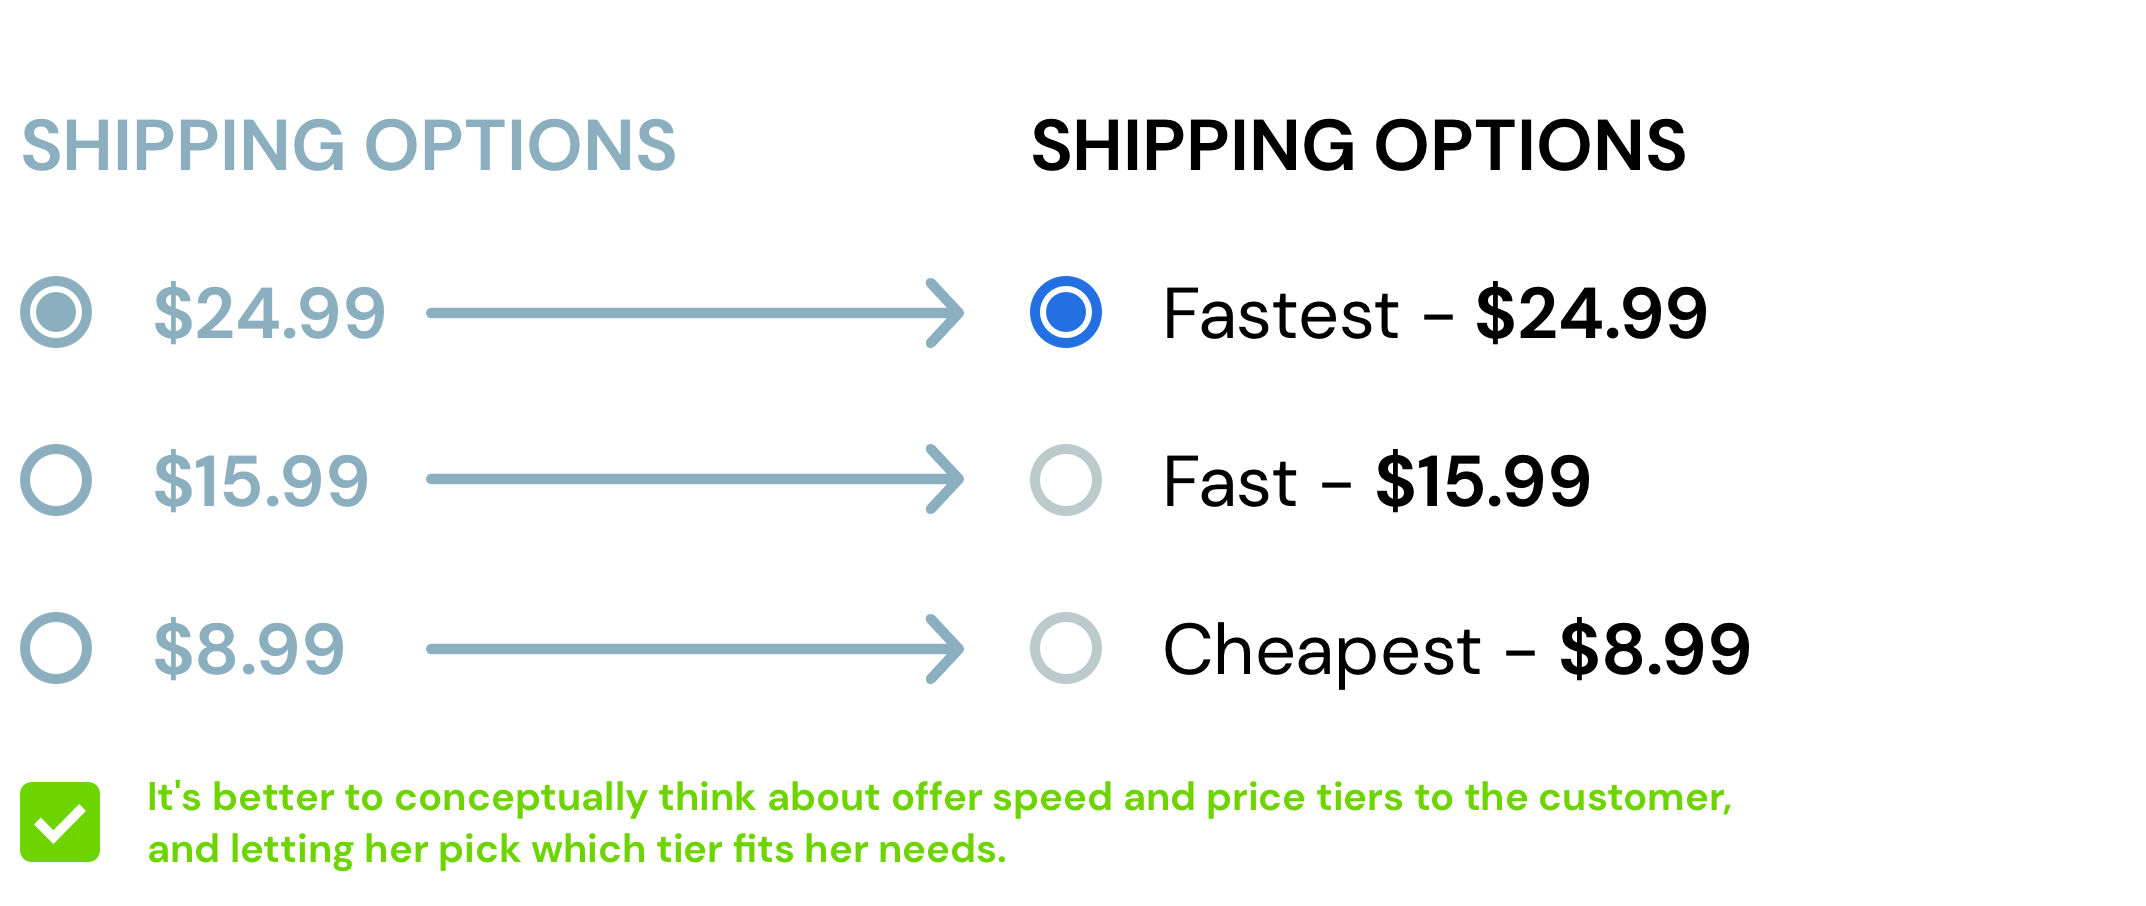 shipping-options-speeds